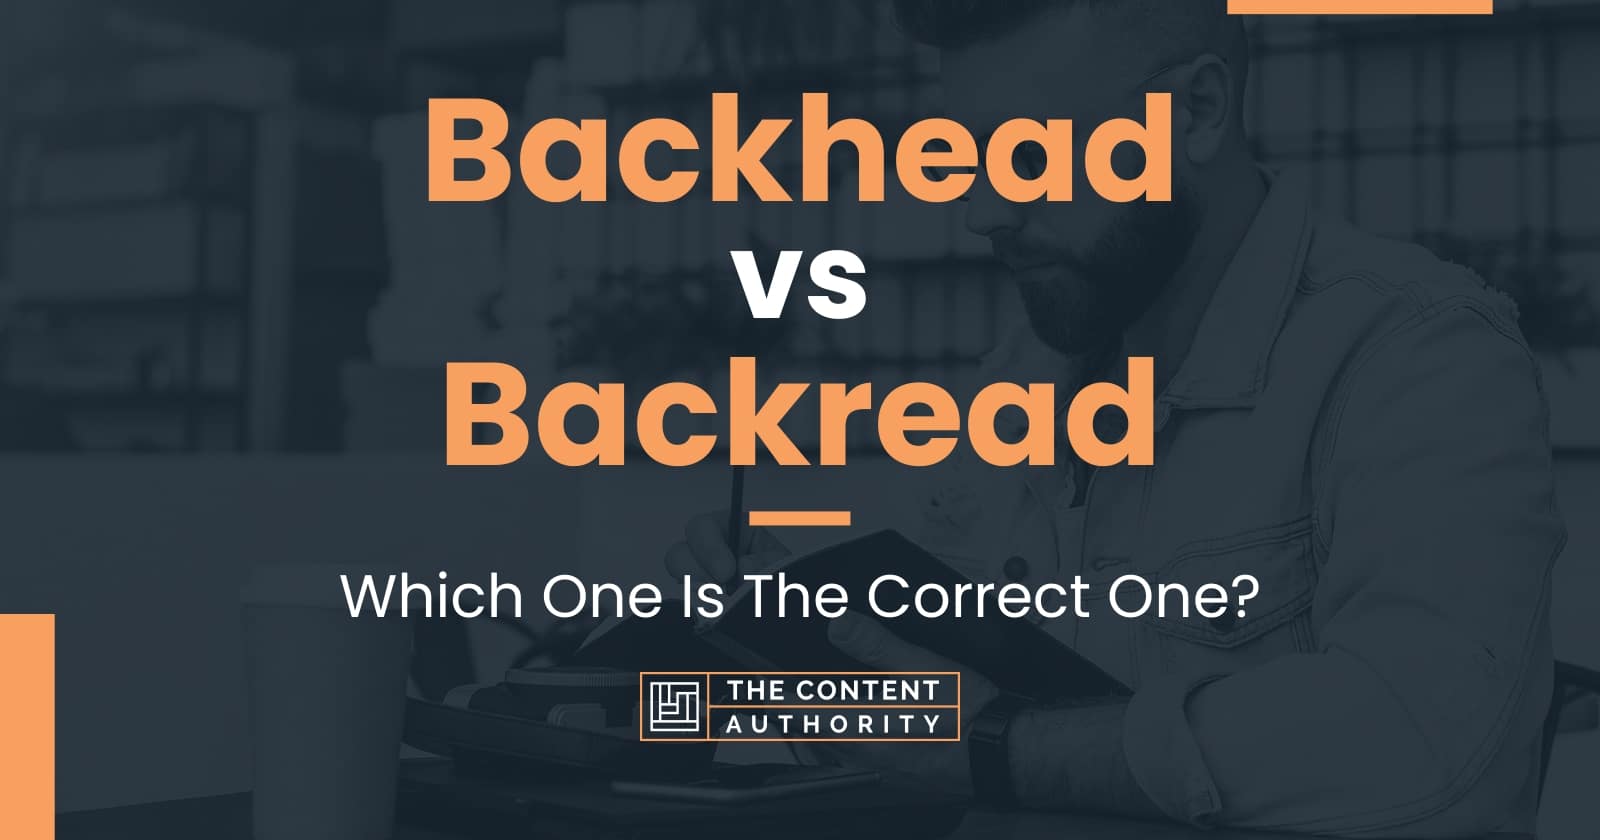 Backhead vs Backread: Which One Is The Correct One?